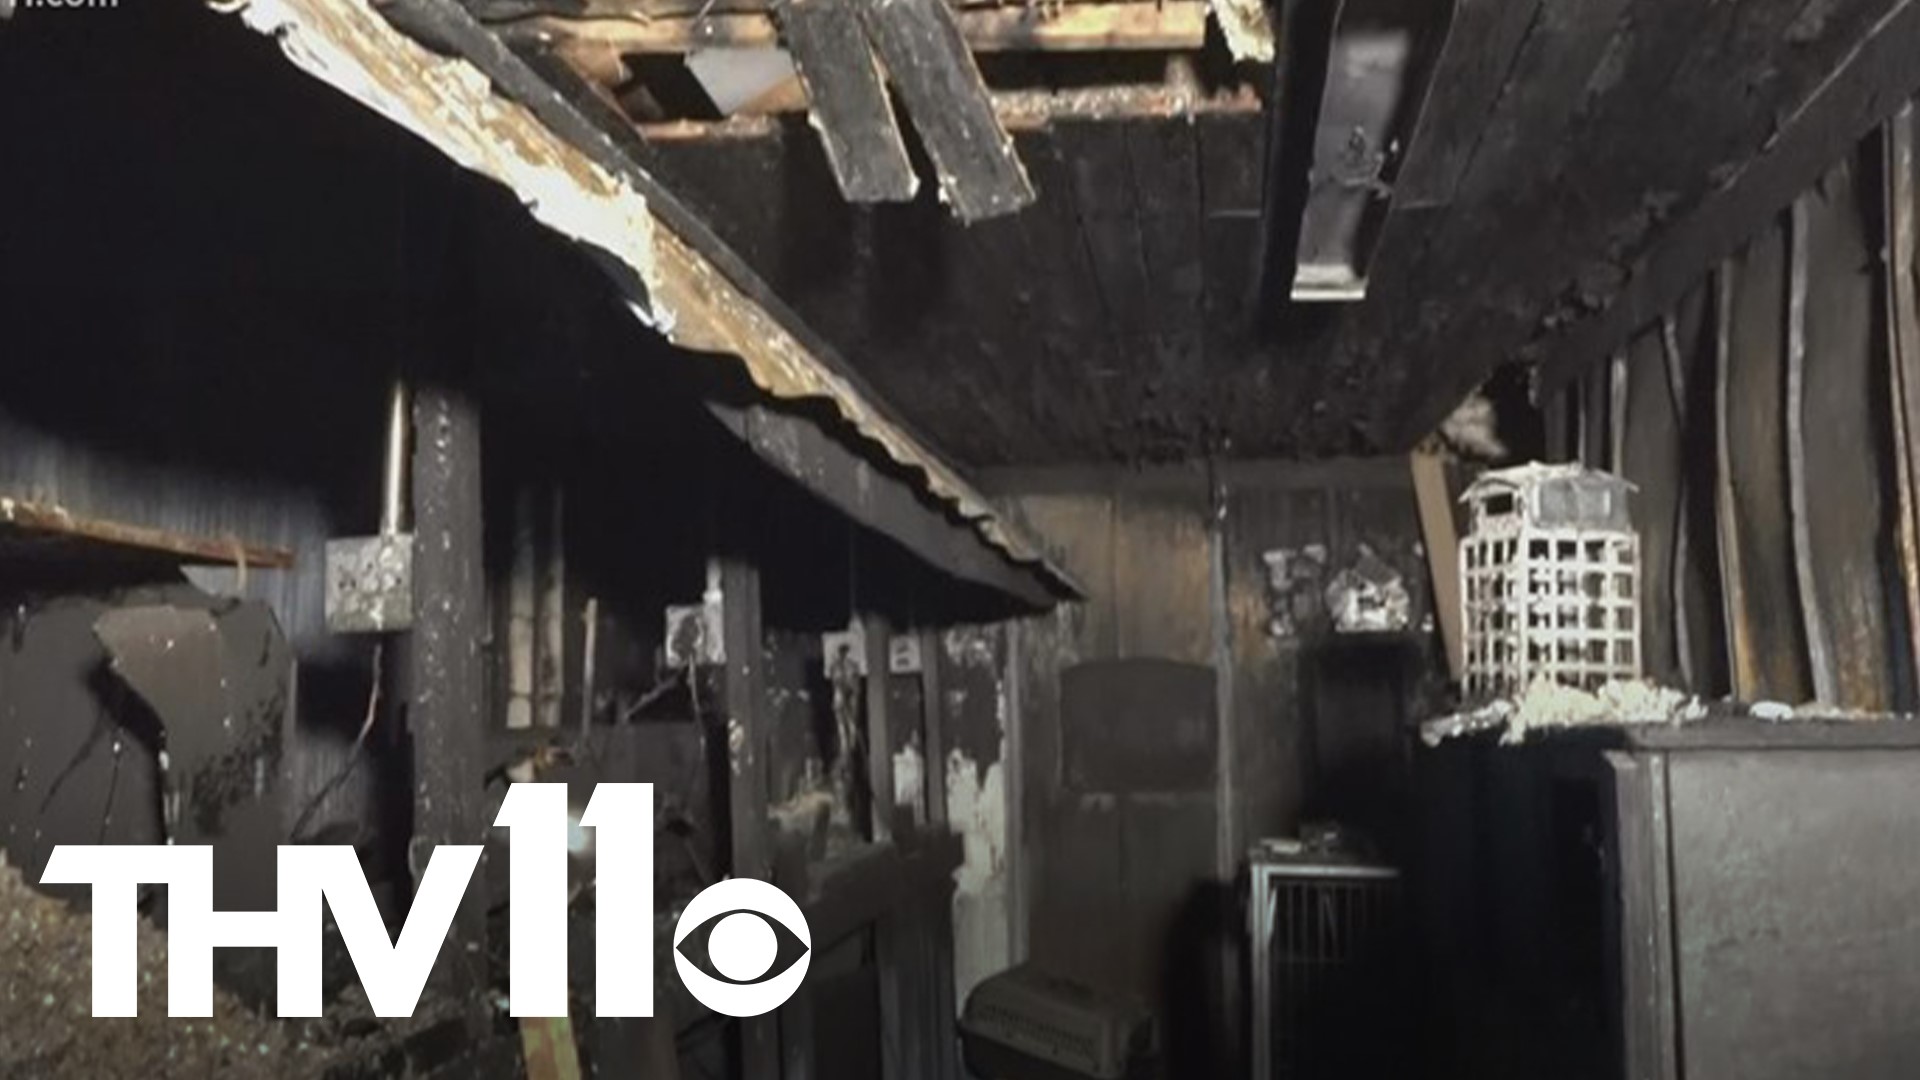 A local petting zoo is devastated after an accidental fire destroys a barn with animals inside.